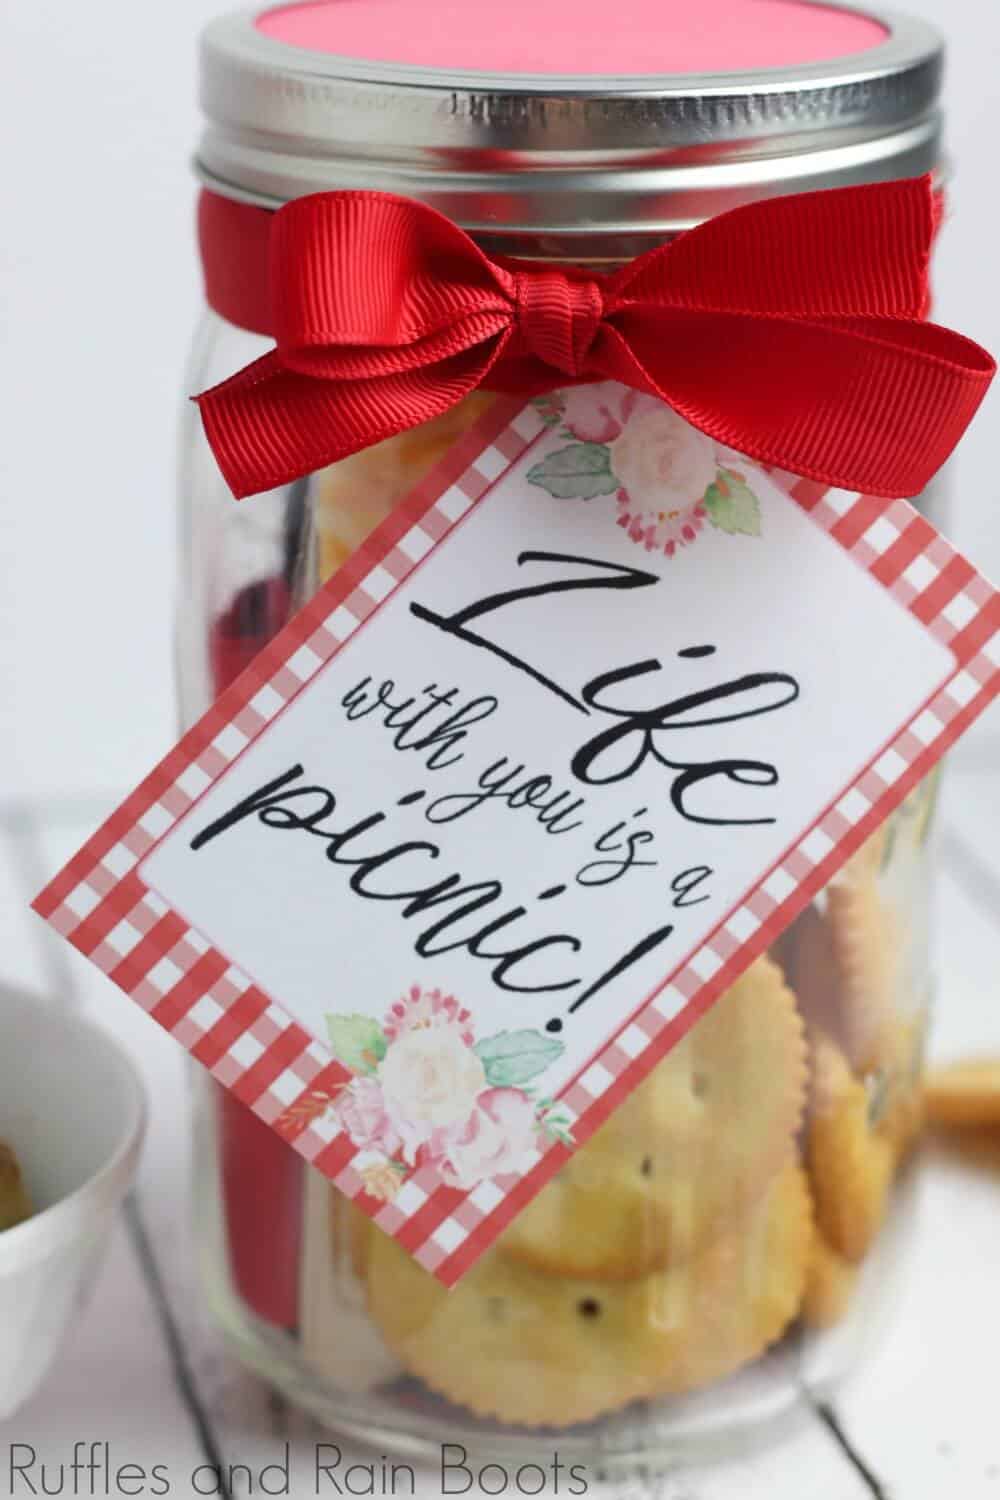 picnic date night in a jar on a white background with free printable tag which reads life with you is a picnic